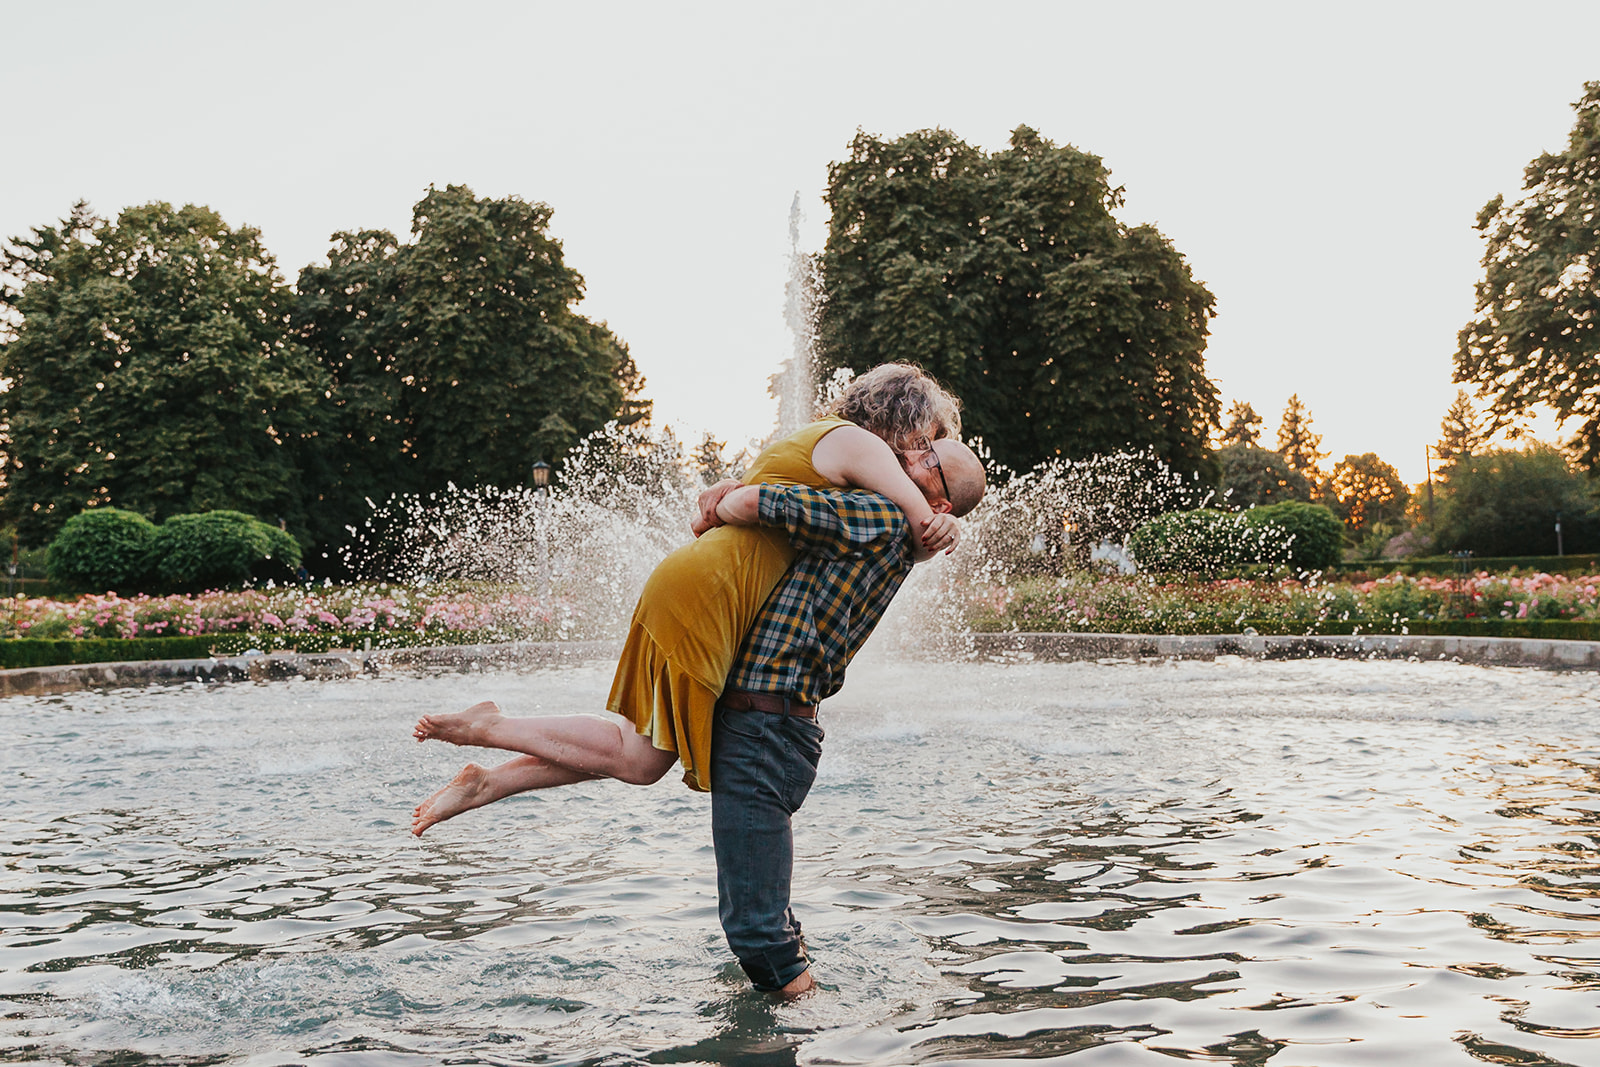 A couple play in the fountain at Peninsula Park, a popular Portland engagement photo location.